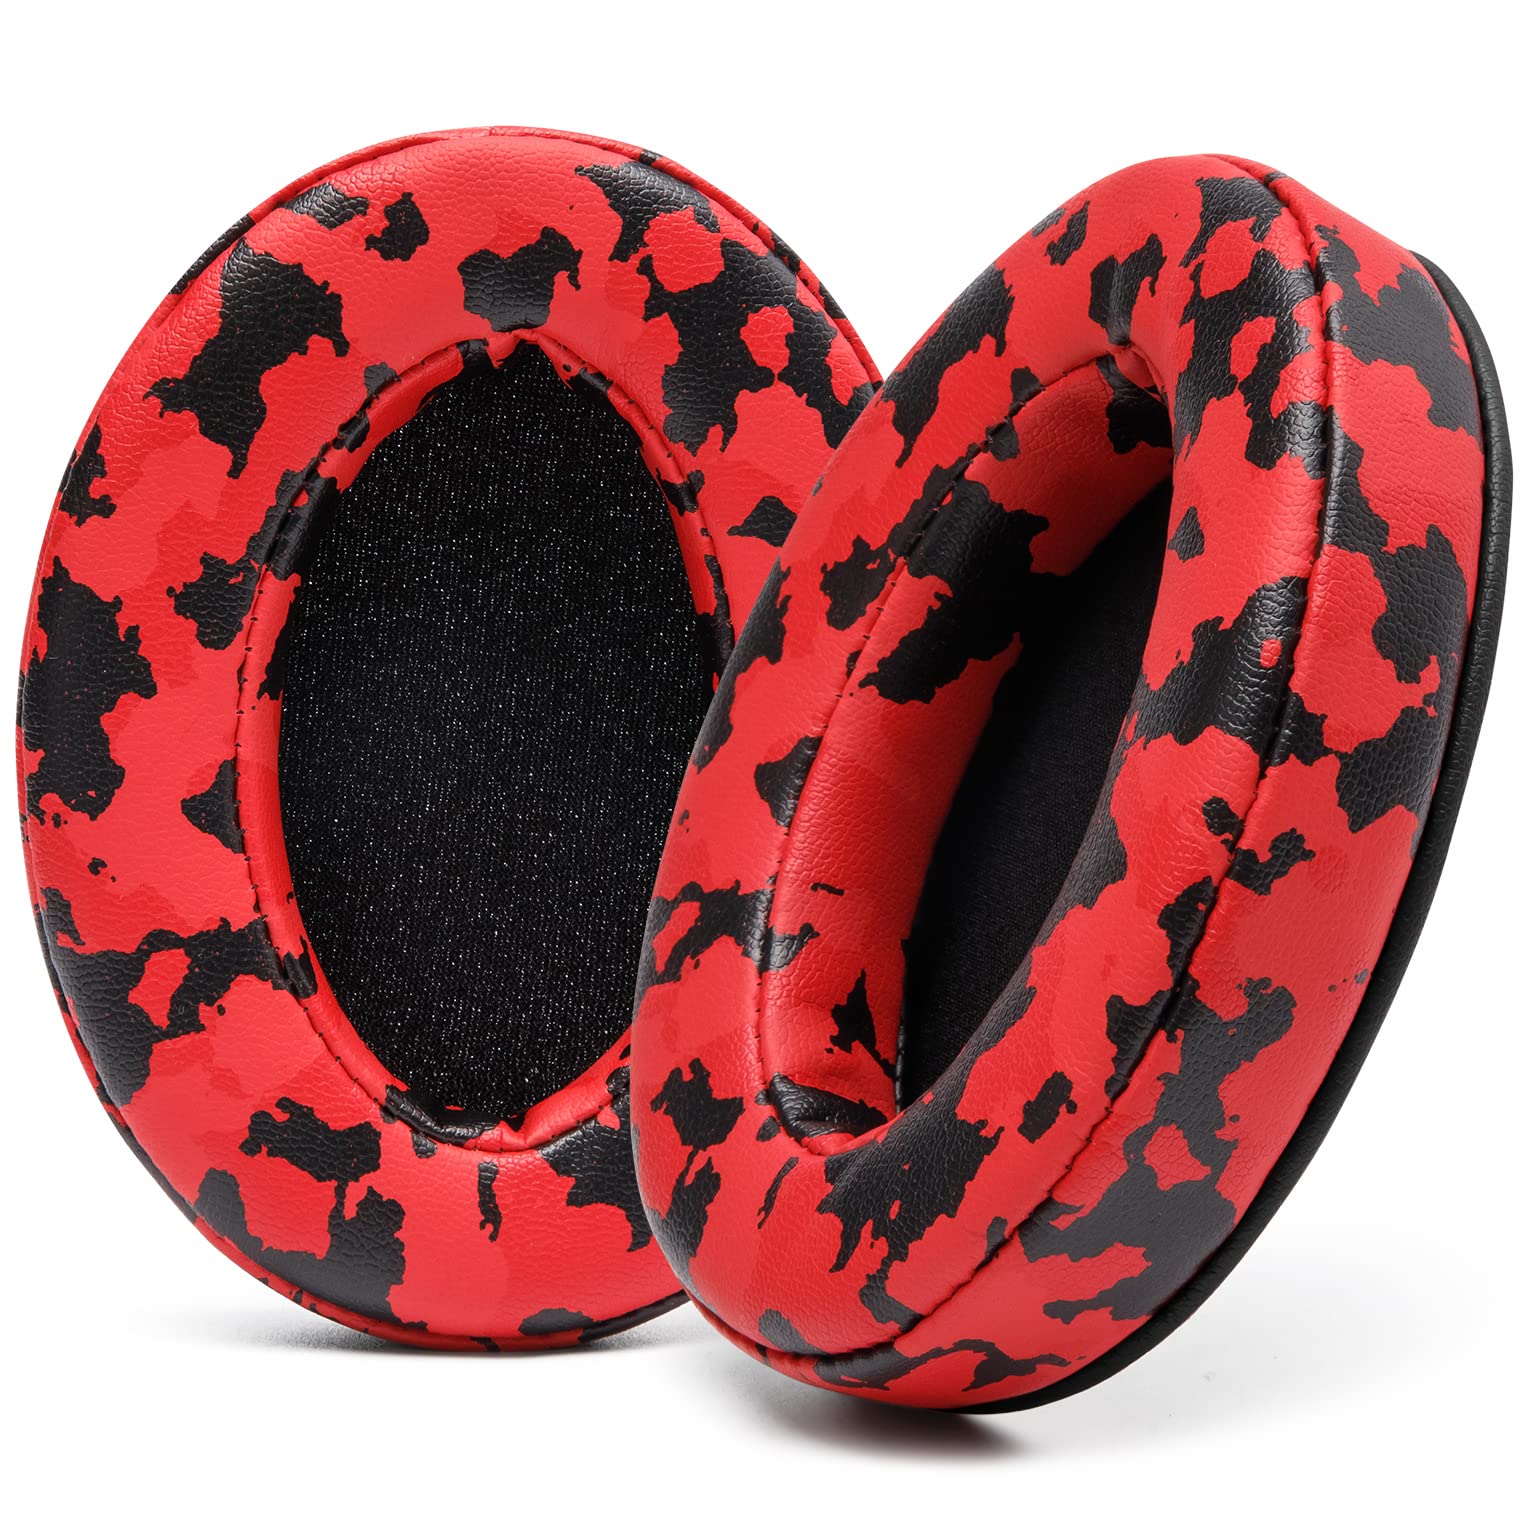 WC Wicked Cushions PadZ - Thick & Soft Ear Pads for ATH M50X / M40X / SteelSeries Arctis/HyperX Cloud & Alpha/Logitech G Pro X/C